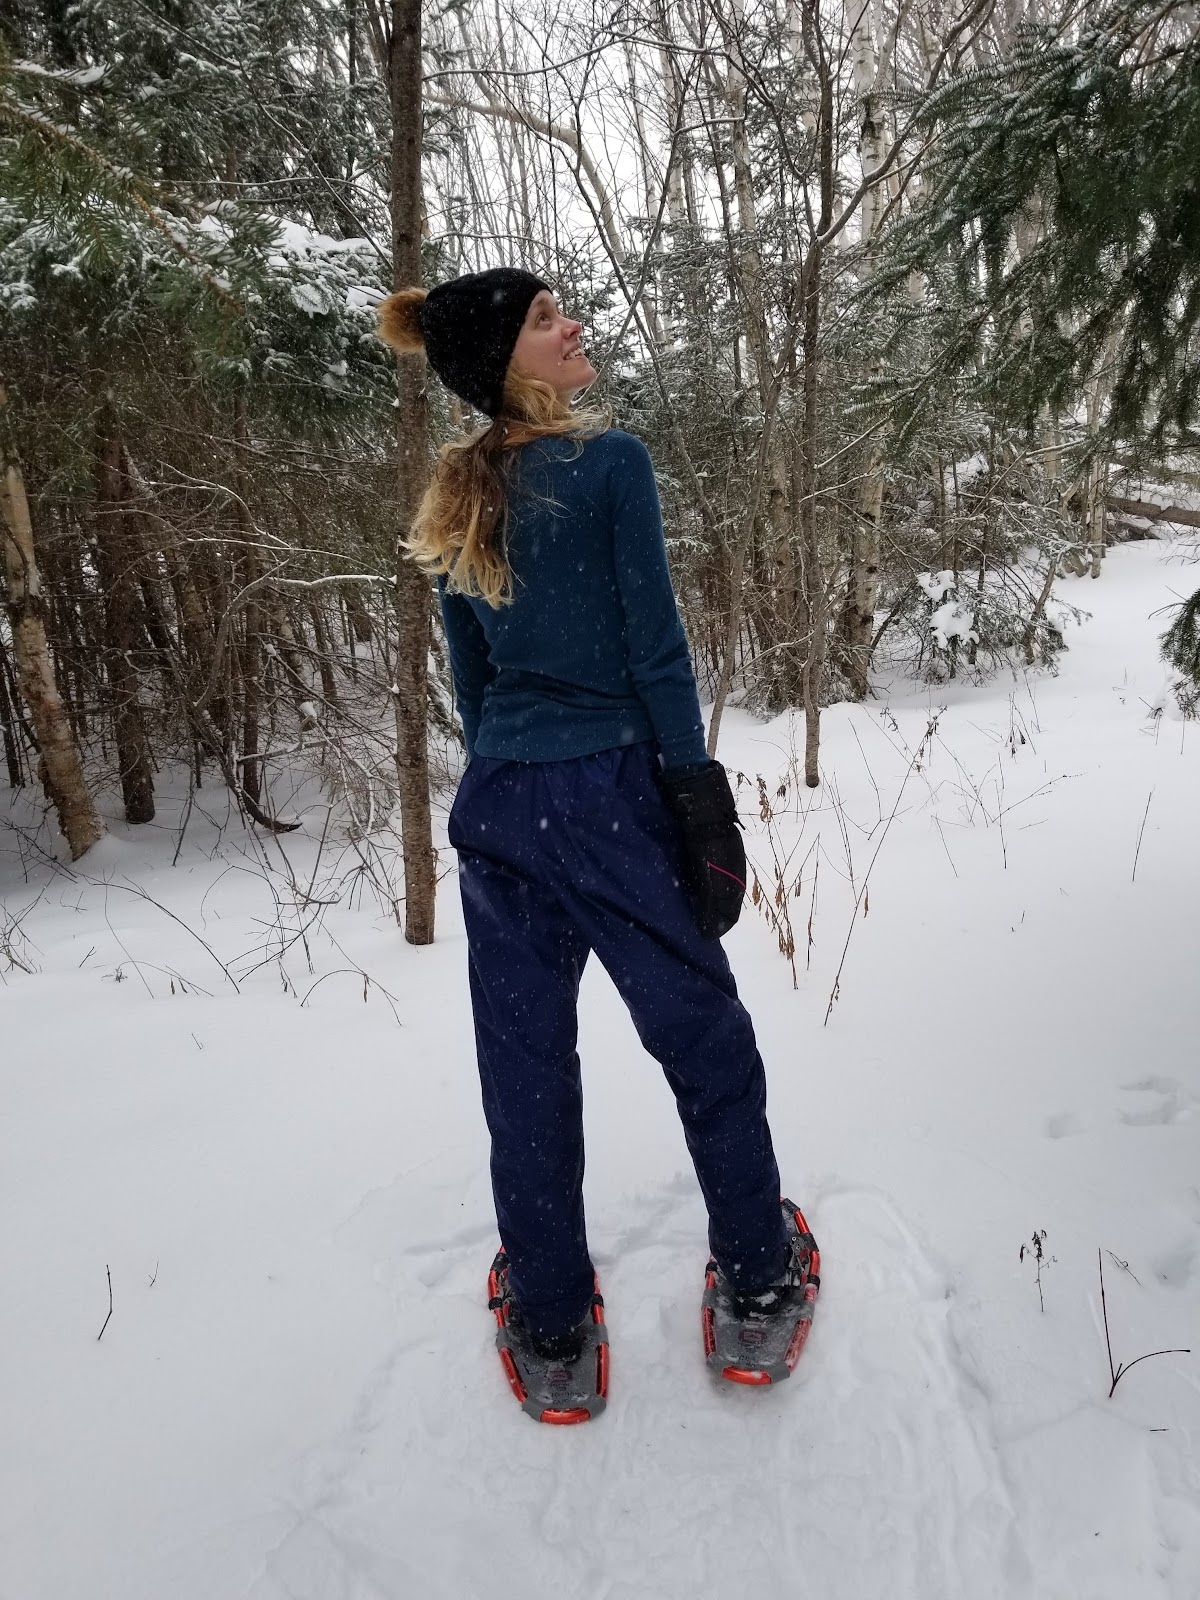 I am standing in the snow looking up at the sky. I am wearing a black hat, a green sweater, blue snow pants and snow shoes.